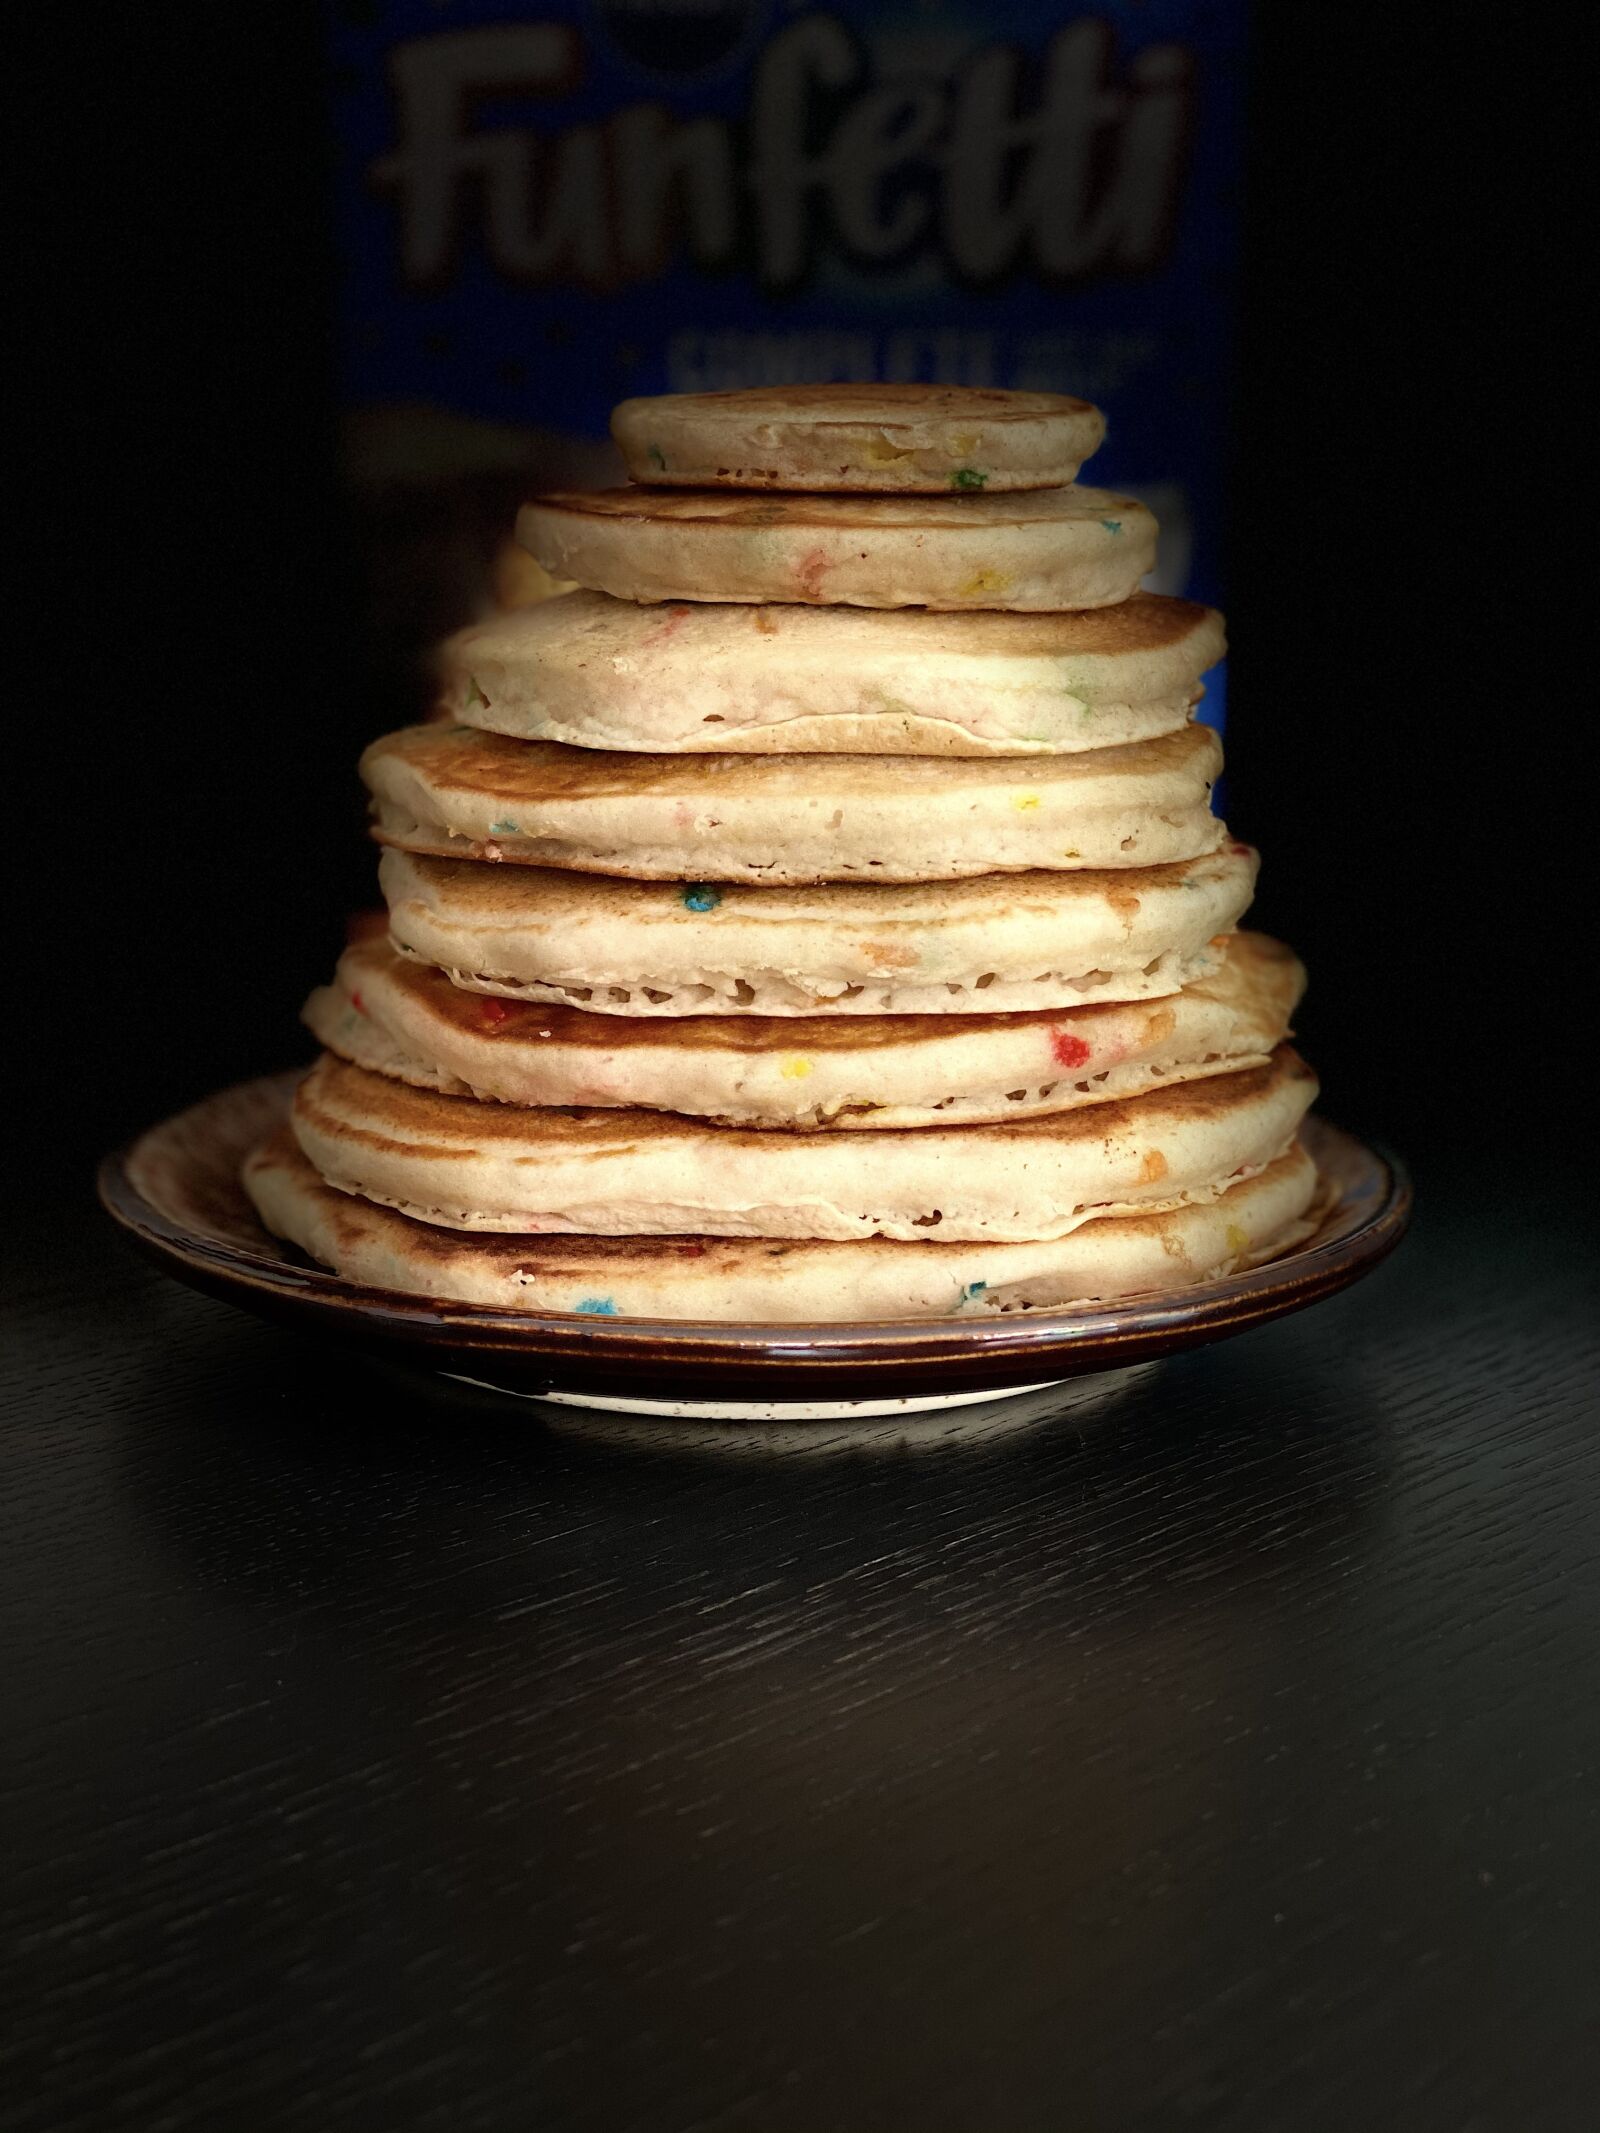 iPhone 11 Pro Max back dual camera 6mm f/2 sample photo. Pancakes, stack of pancakes photography